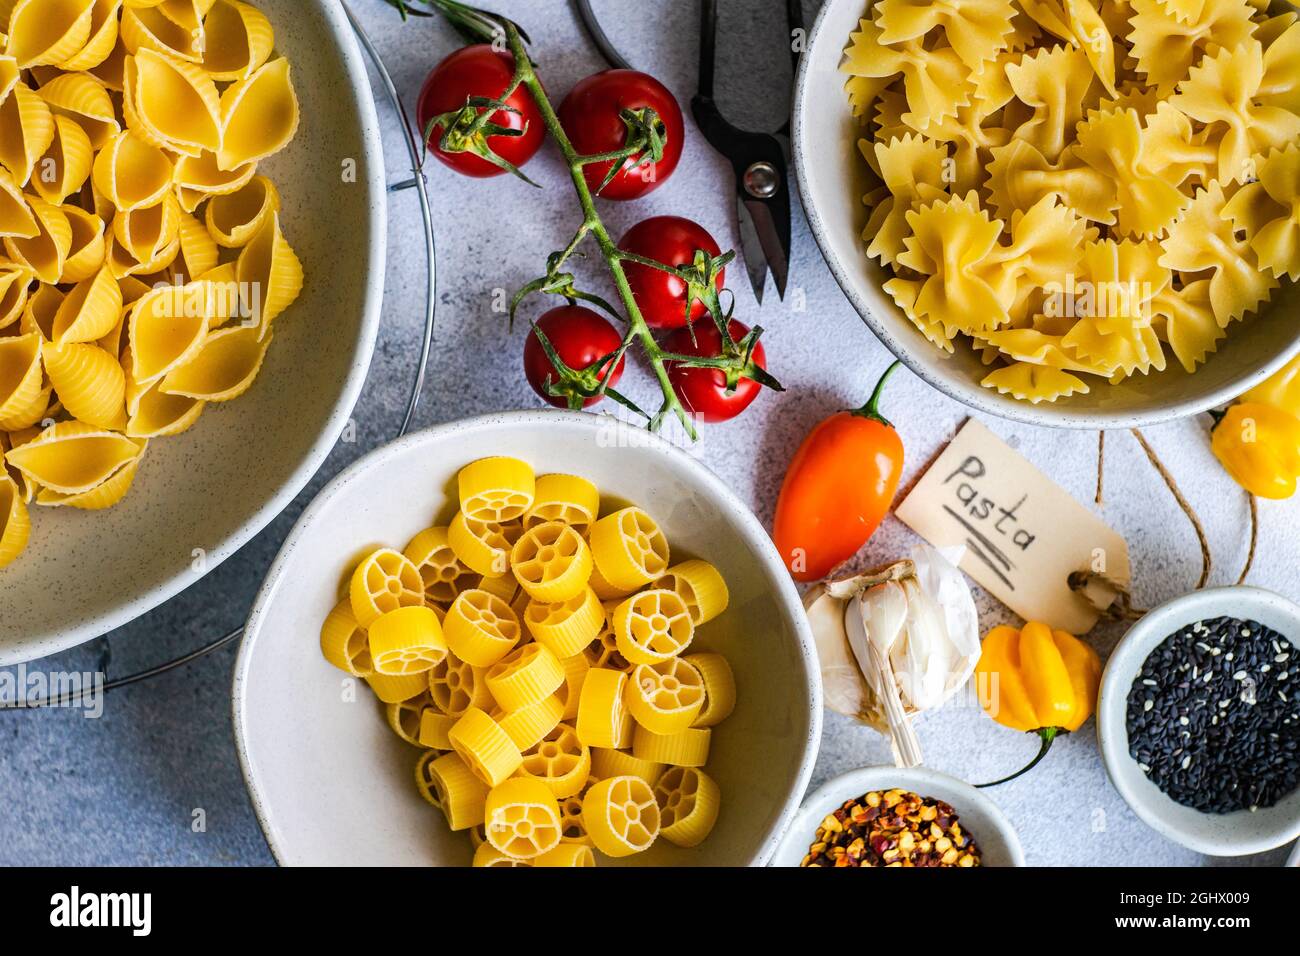 Raw pasta on a table with ingredients for making a sauce Stock Photo